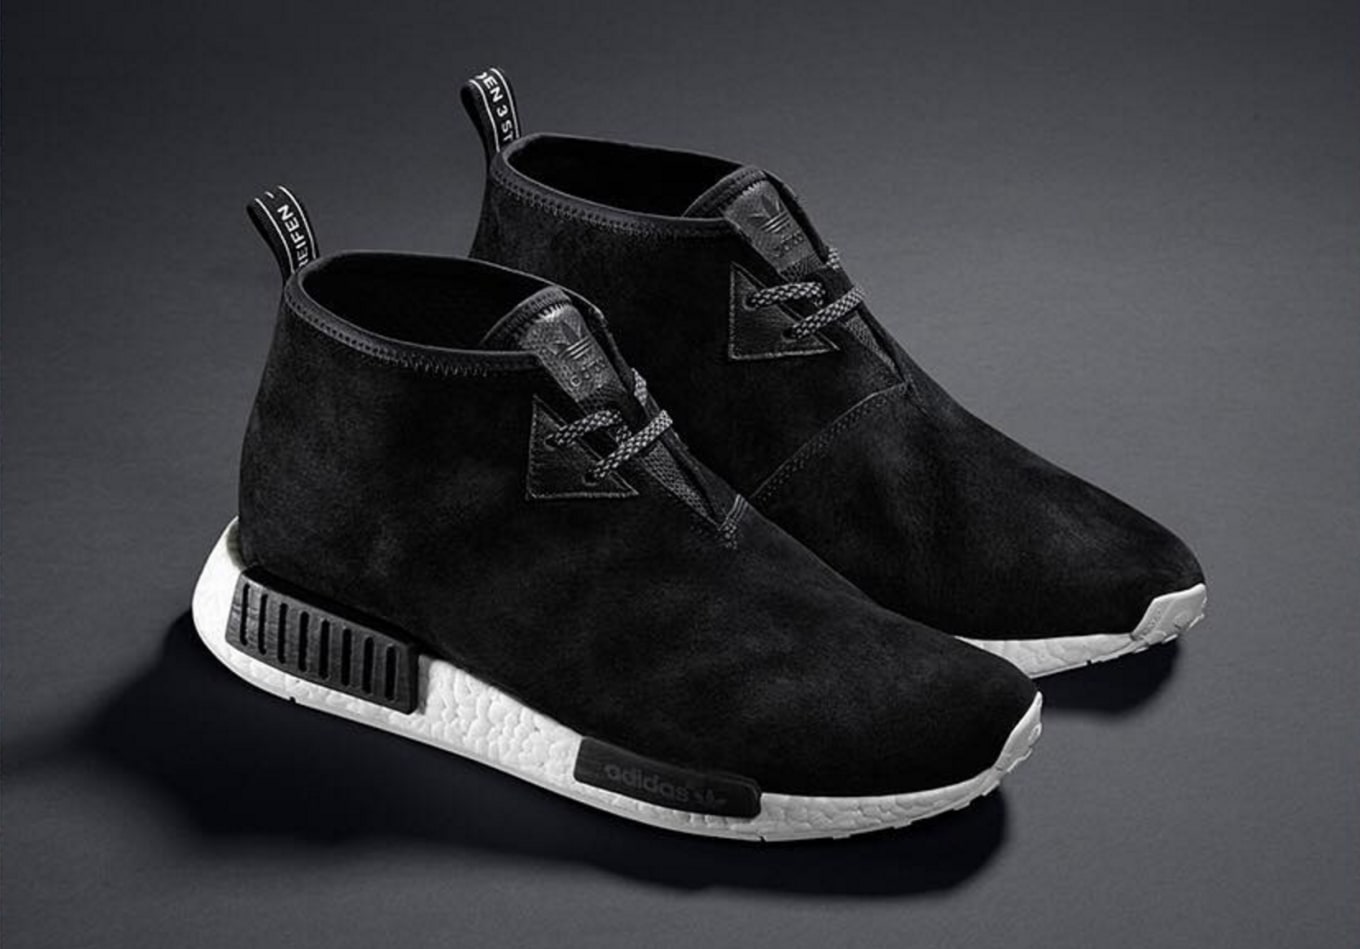 adidas NMD Chukka Release Date | Sole Collector